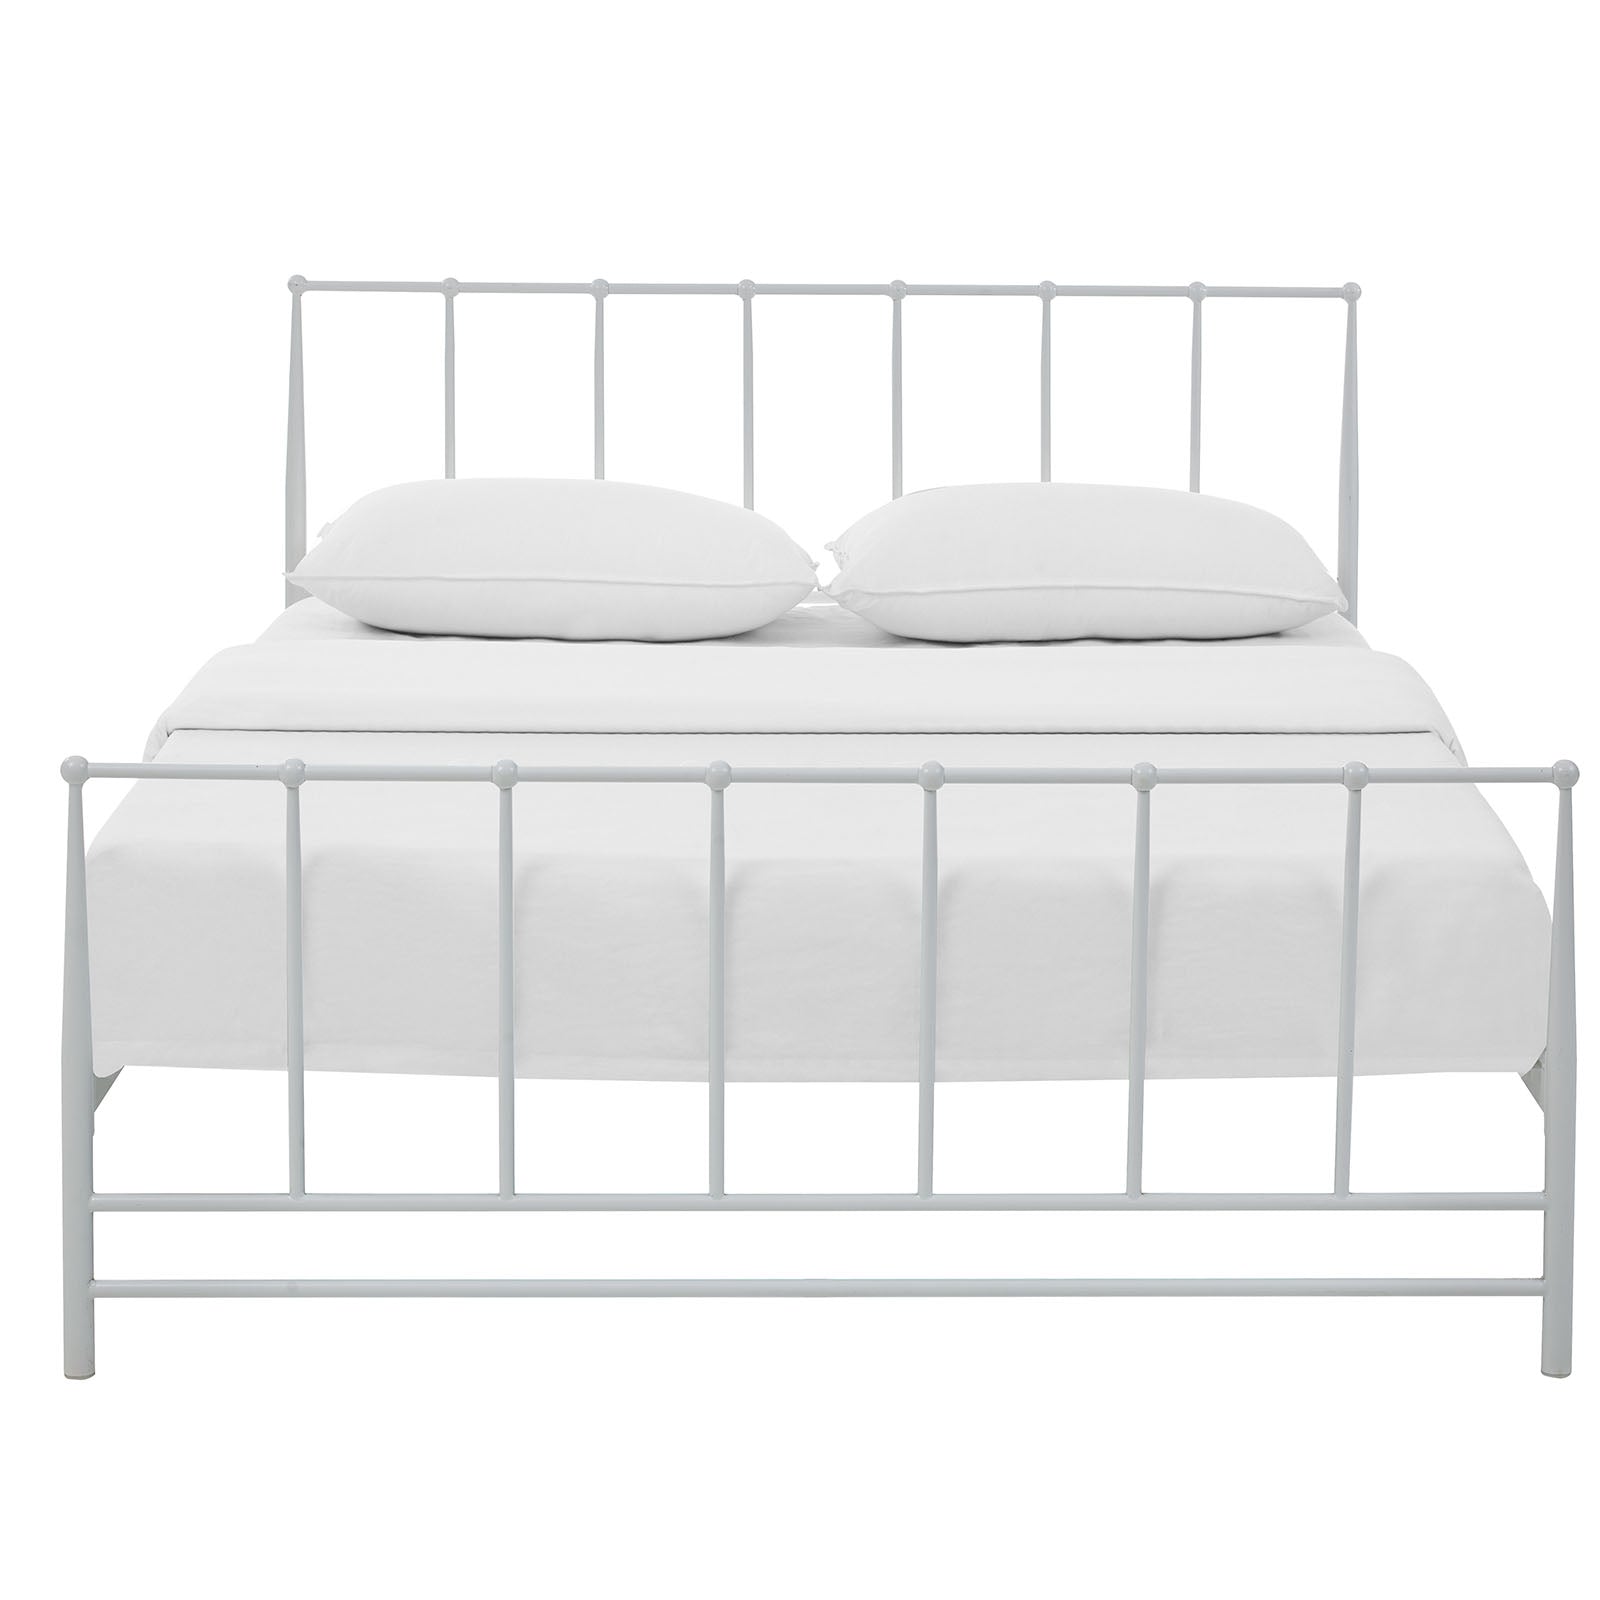 Modway Beds - Estate Queen Bed White